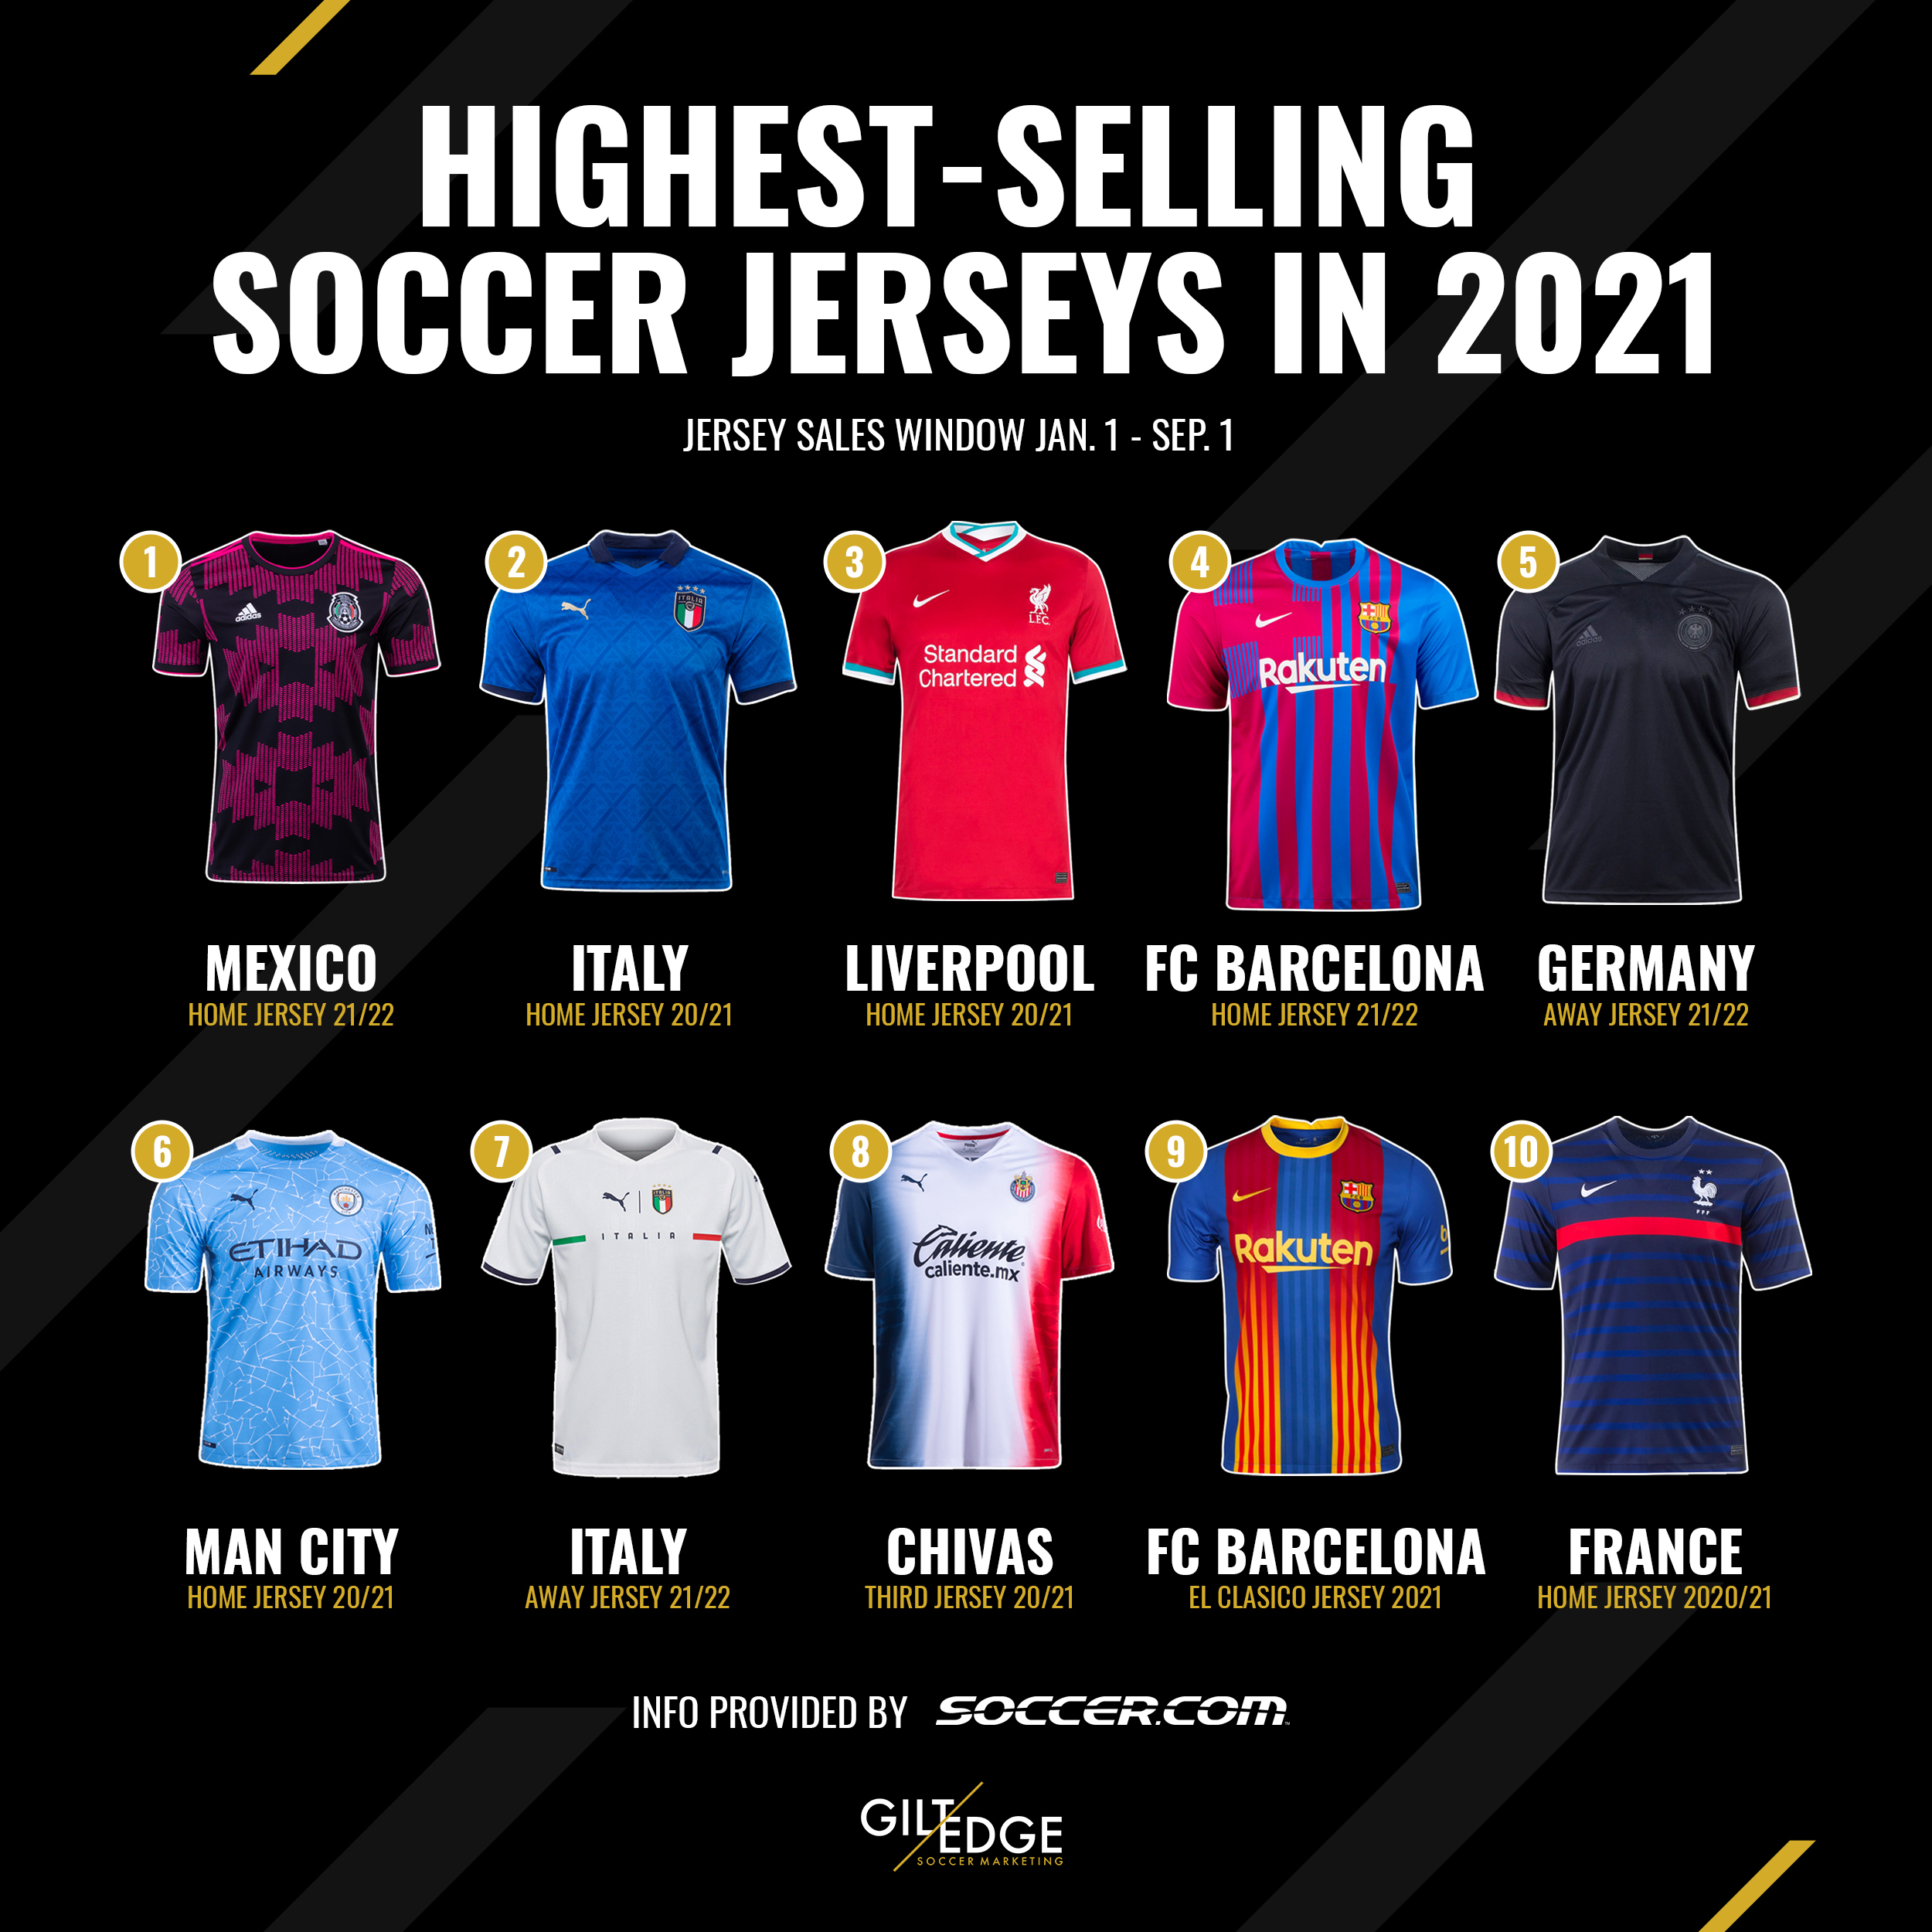 Shop All Club Jerseys from Soccer Post